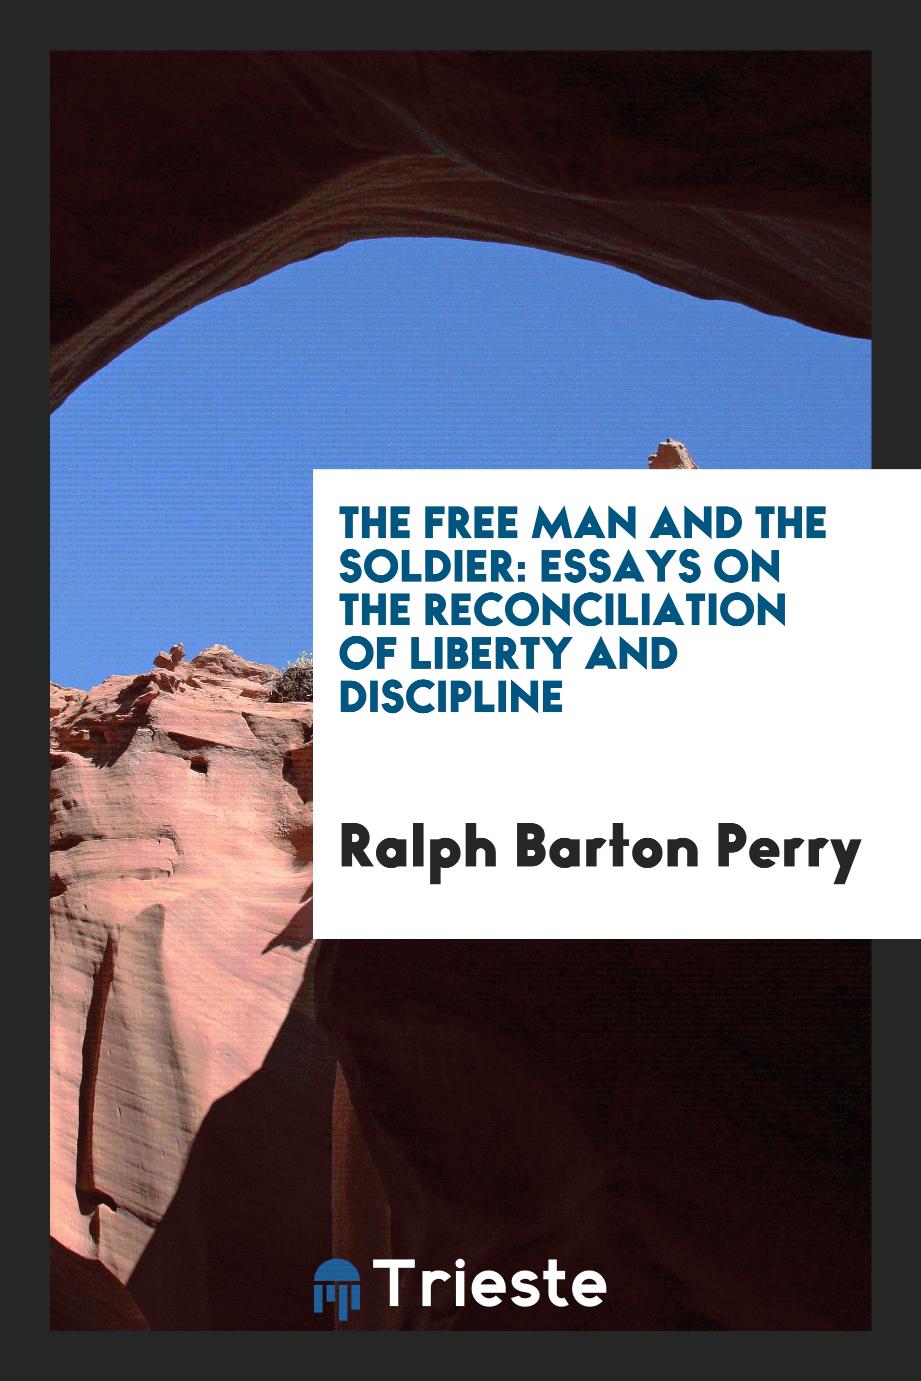 The Free Man and the Soldier: Essays on the Reconciliation of Liberty and Discipline